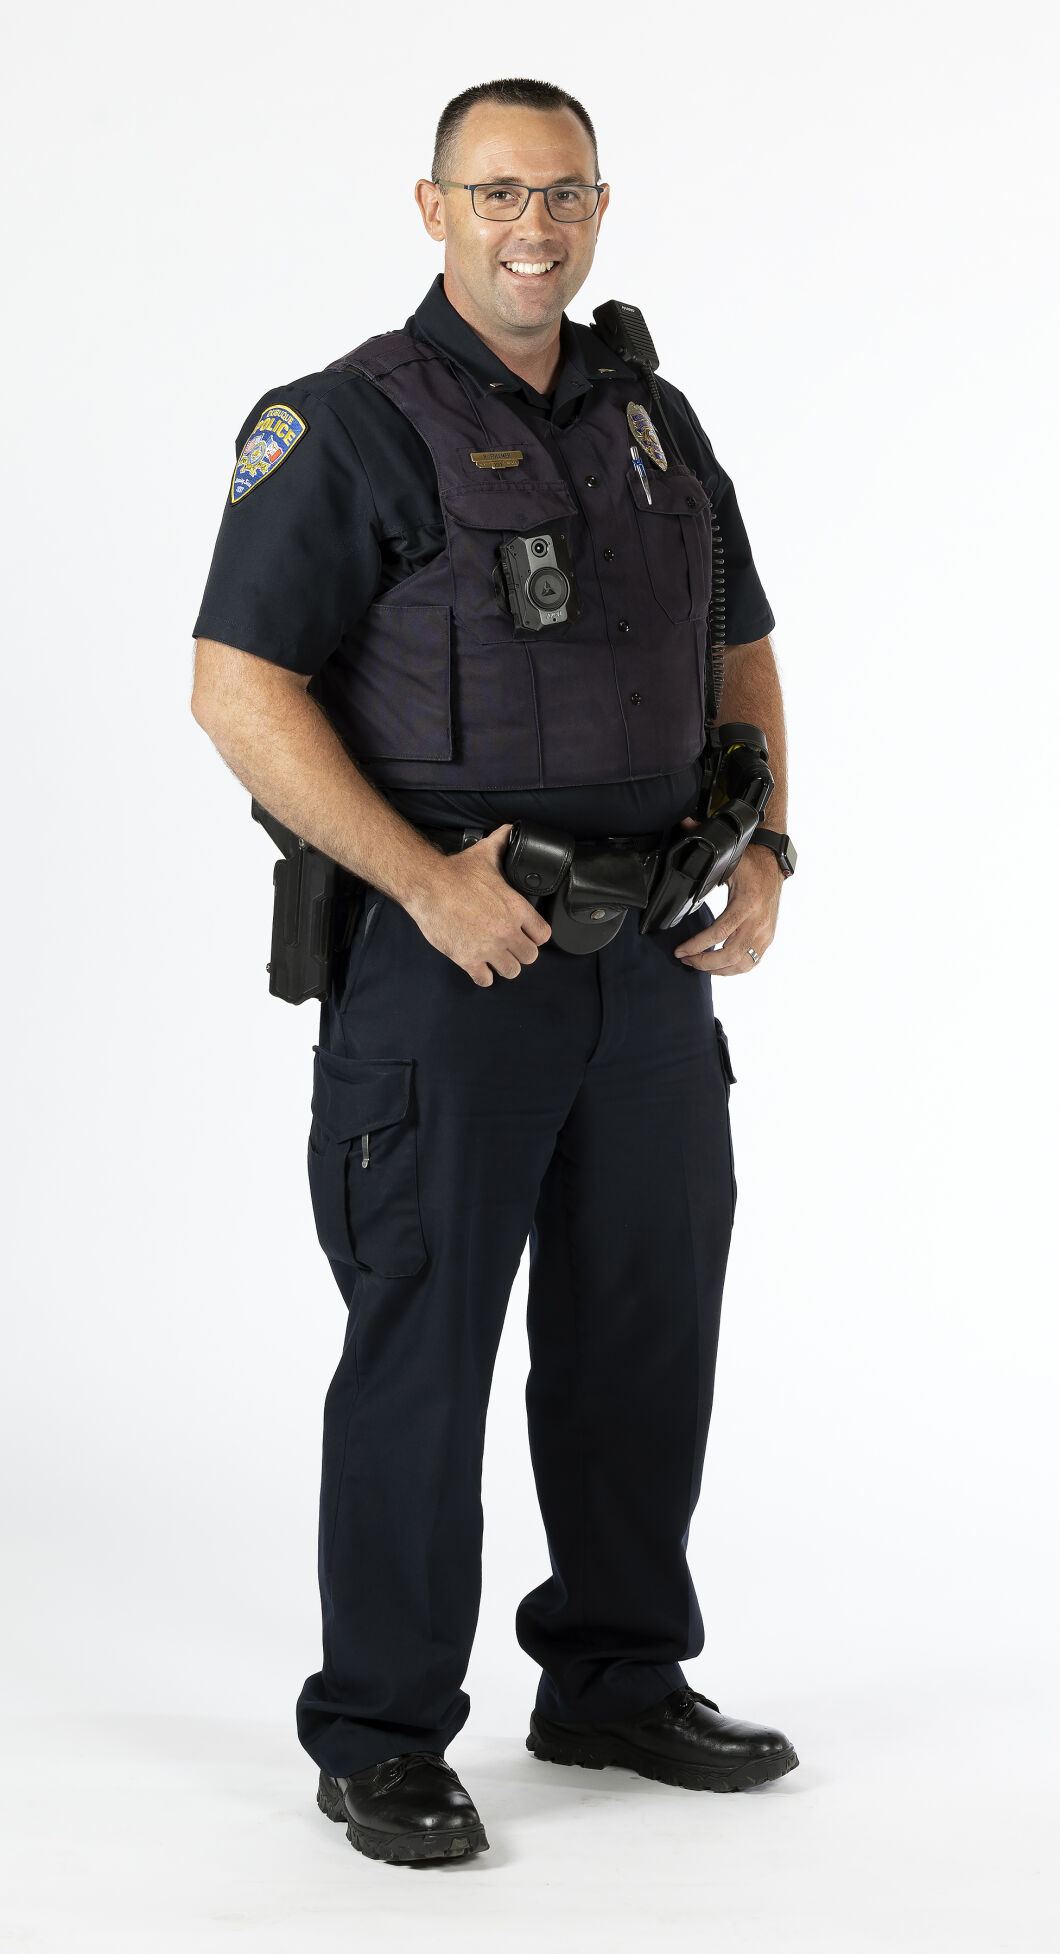 Lieutenant Richard Fullmer, with the Dubuque Police Department, is a Rising Star.    PHOTO CREDIT: Stephen Gassman